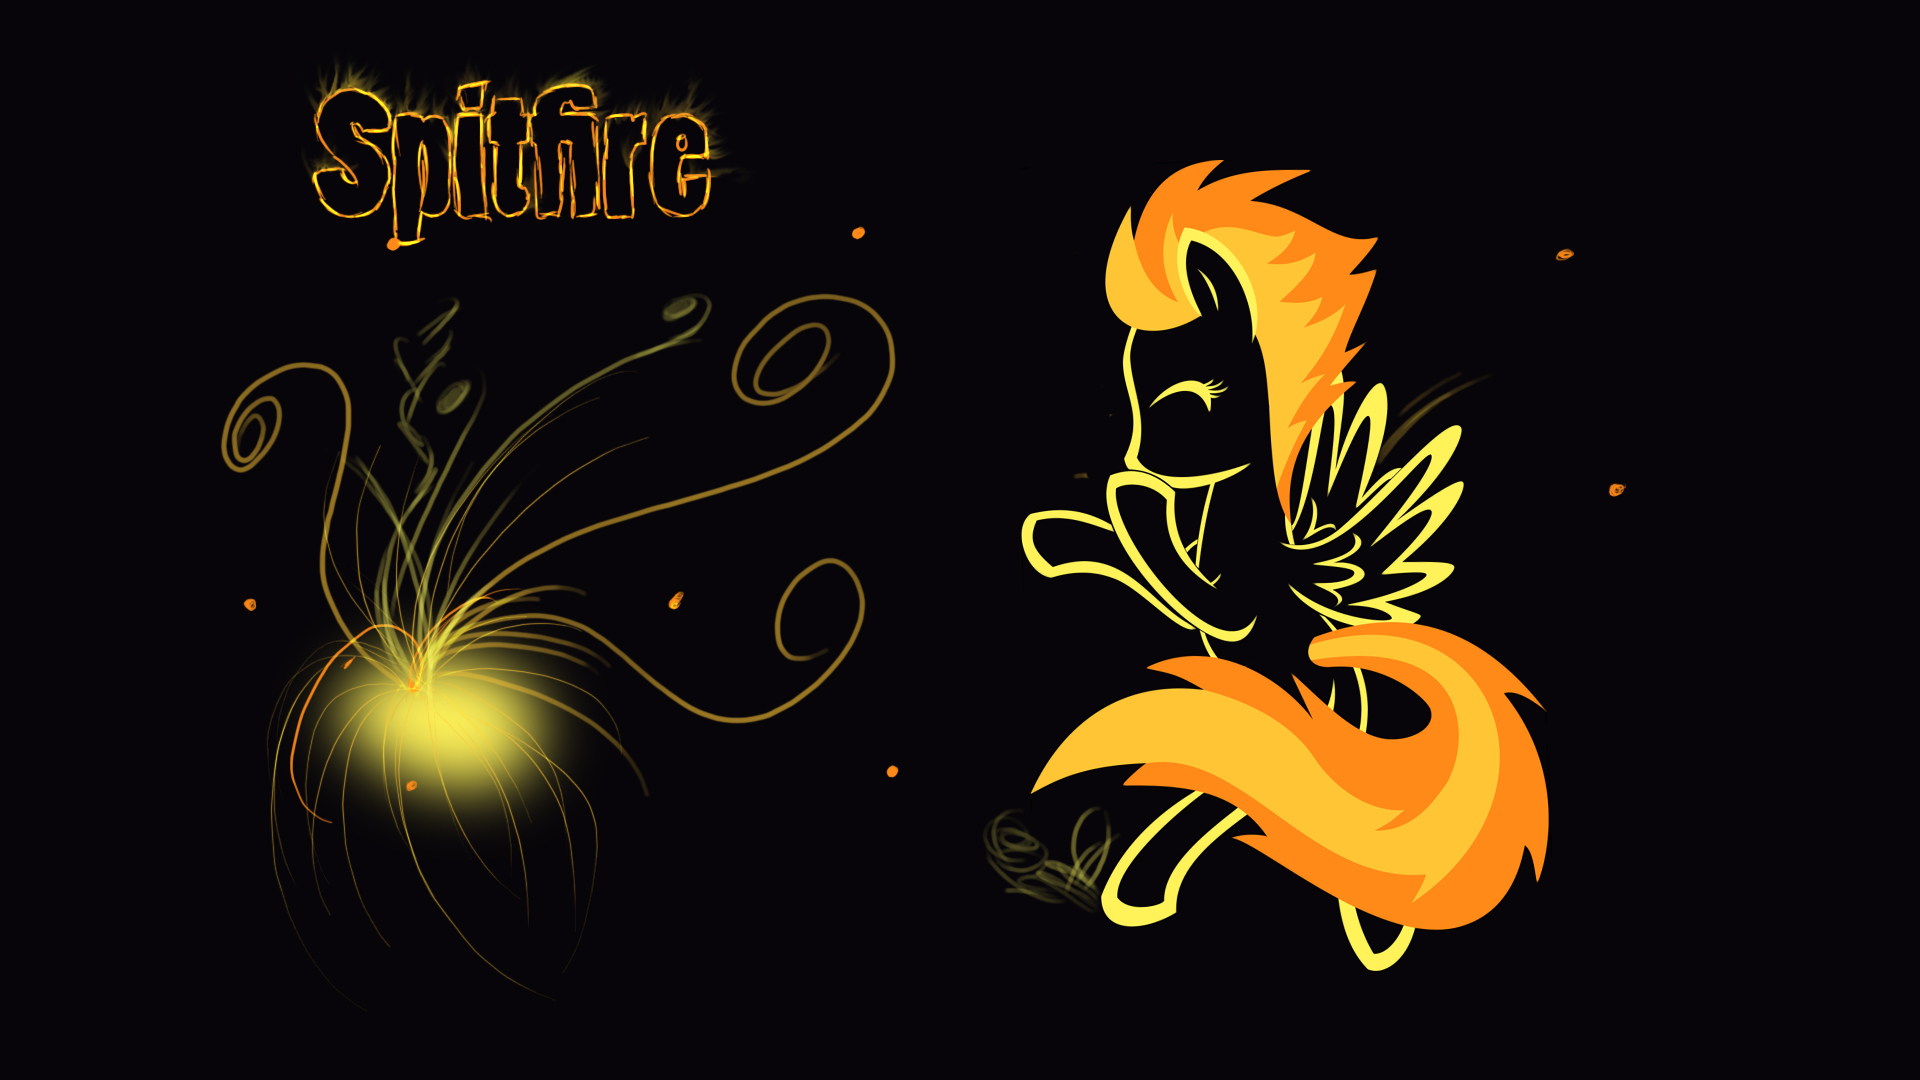 Spitfire Wallpaper 1920x1080 by Pcyzicus and UP1TER